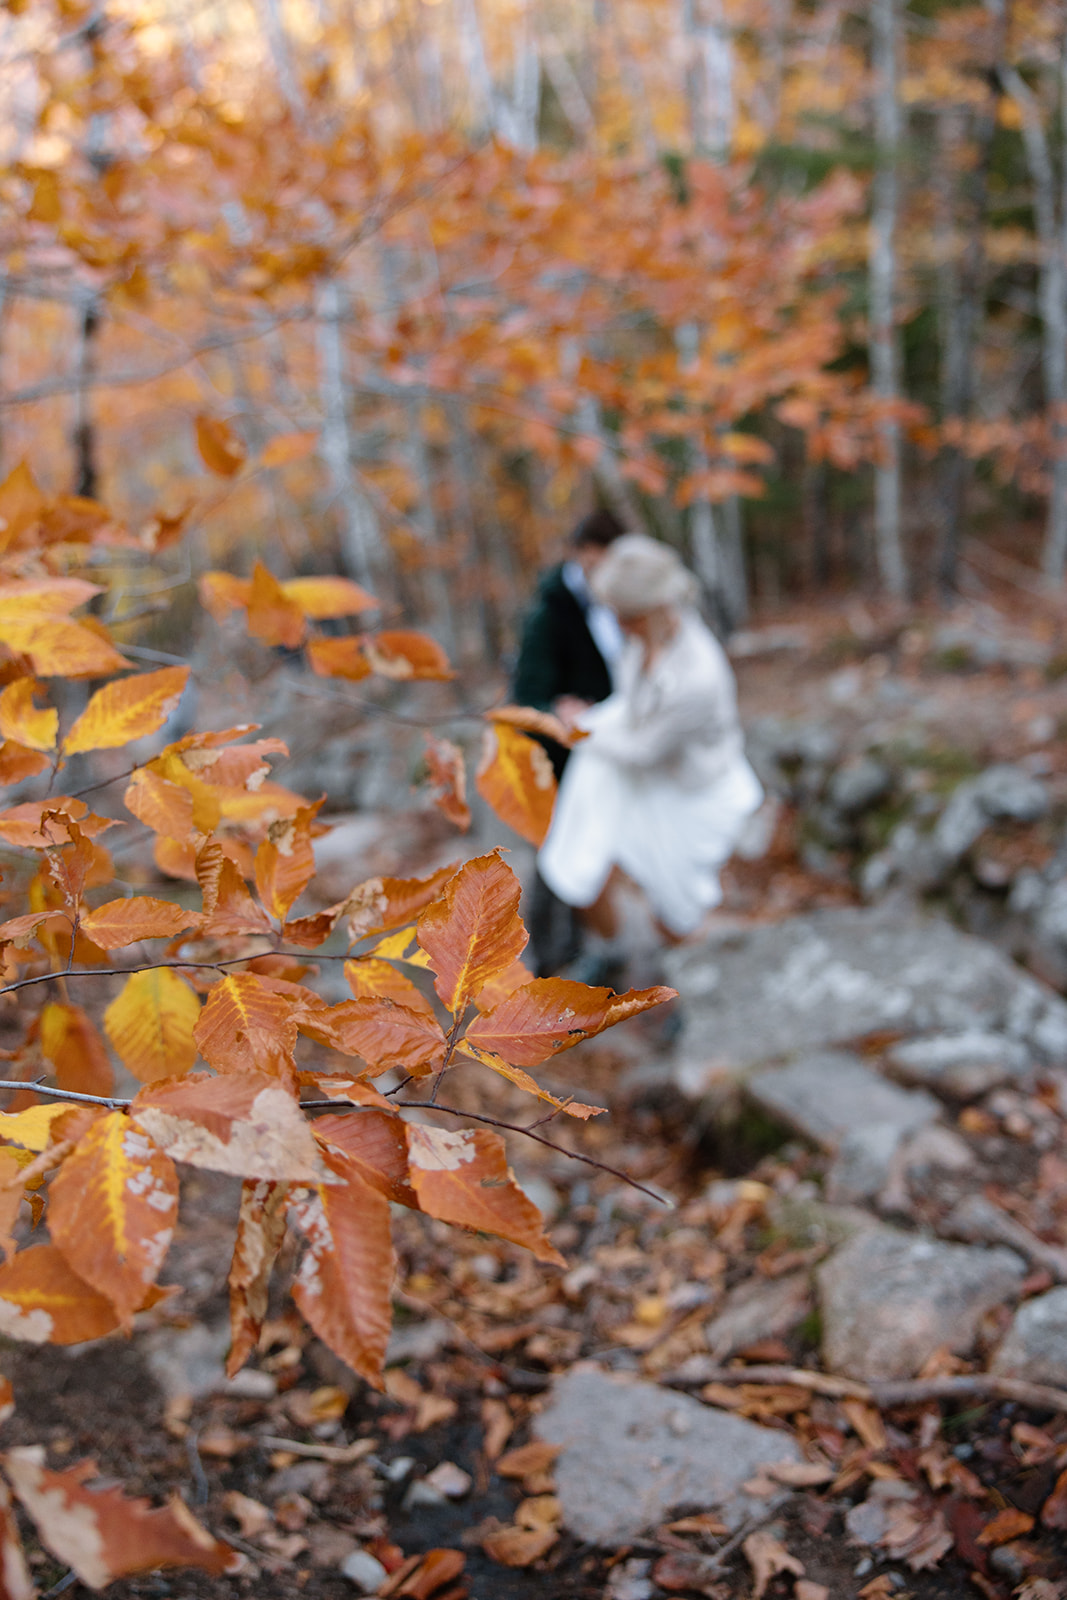 Hiking up Bubble trail in Acadia National Park on wedding day. 